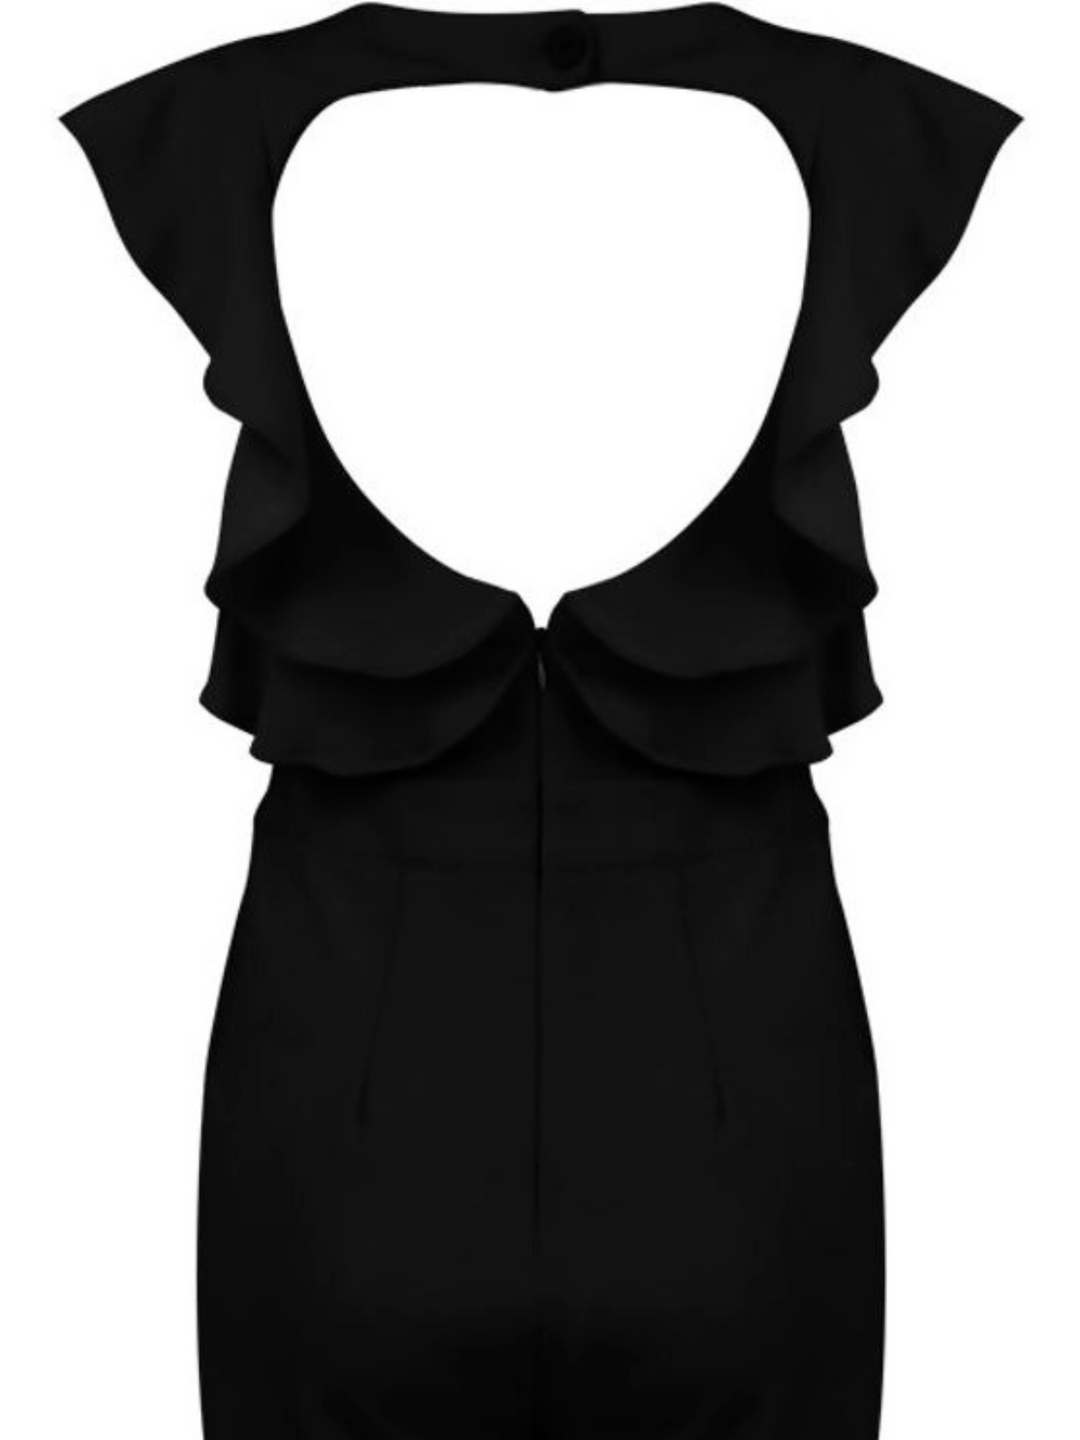 Closeup of a ghost manequin wearing sleeveless black jumpsuit with pleated frill sides and  open back. The jumpsuit has a concealed zip back fastening. The back of the jumpsuit is visible, the open back is evident, including the concealed zip.